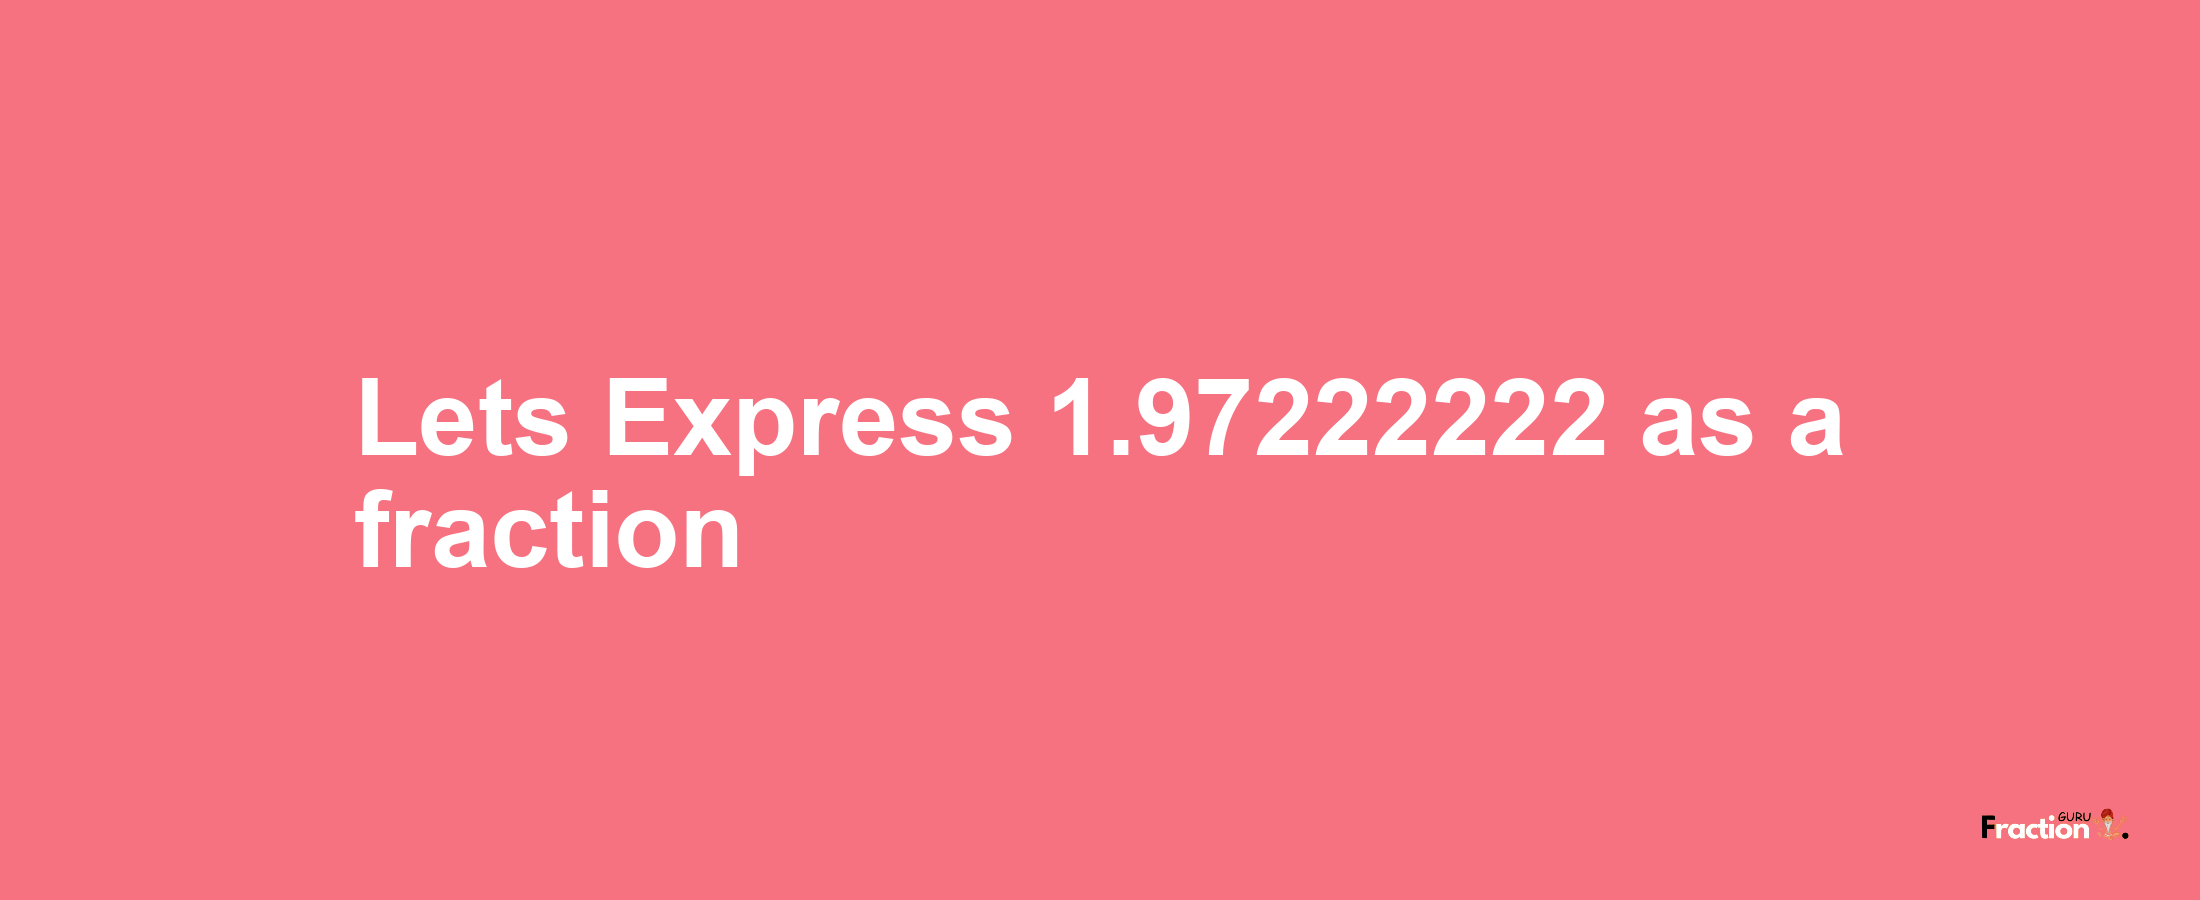 Lets Express 1.97222222 as afraction